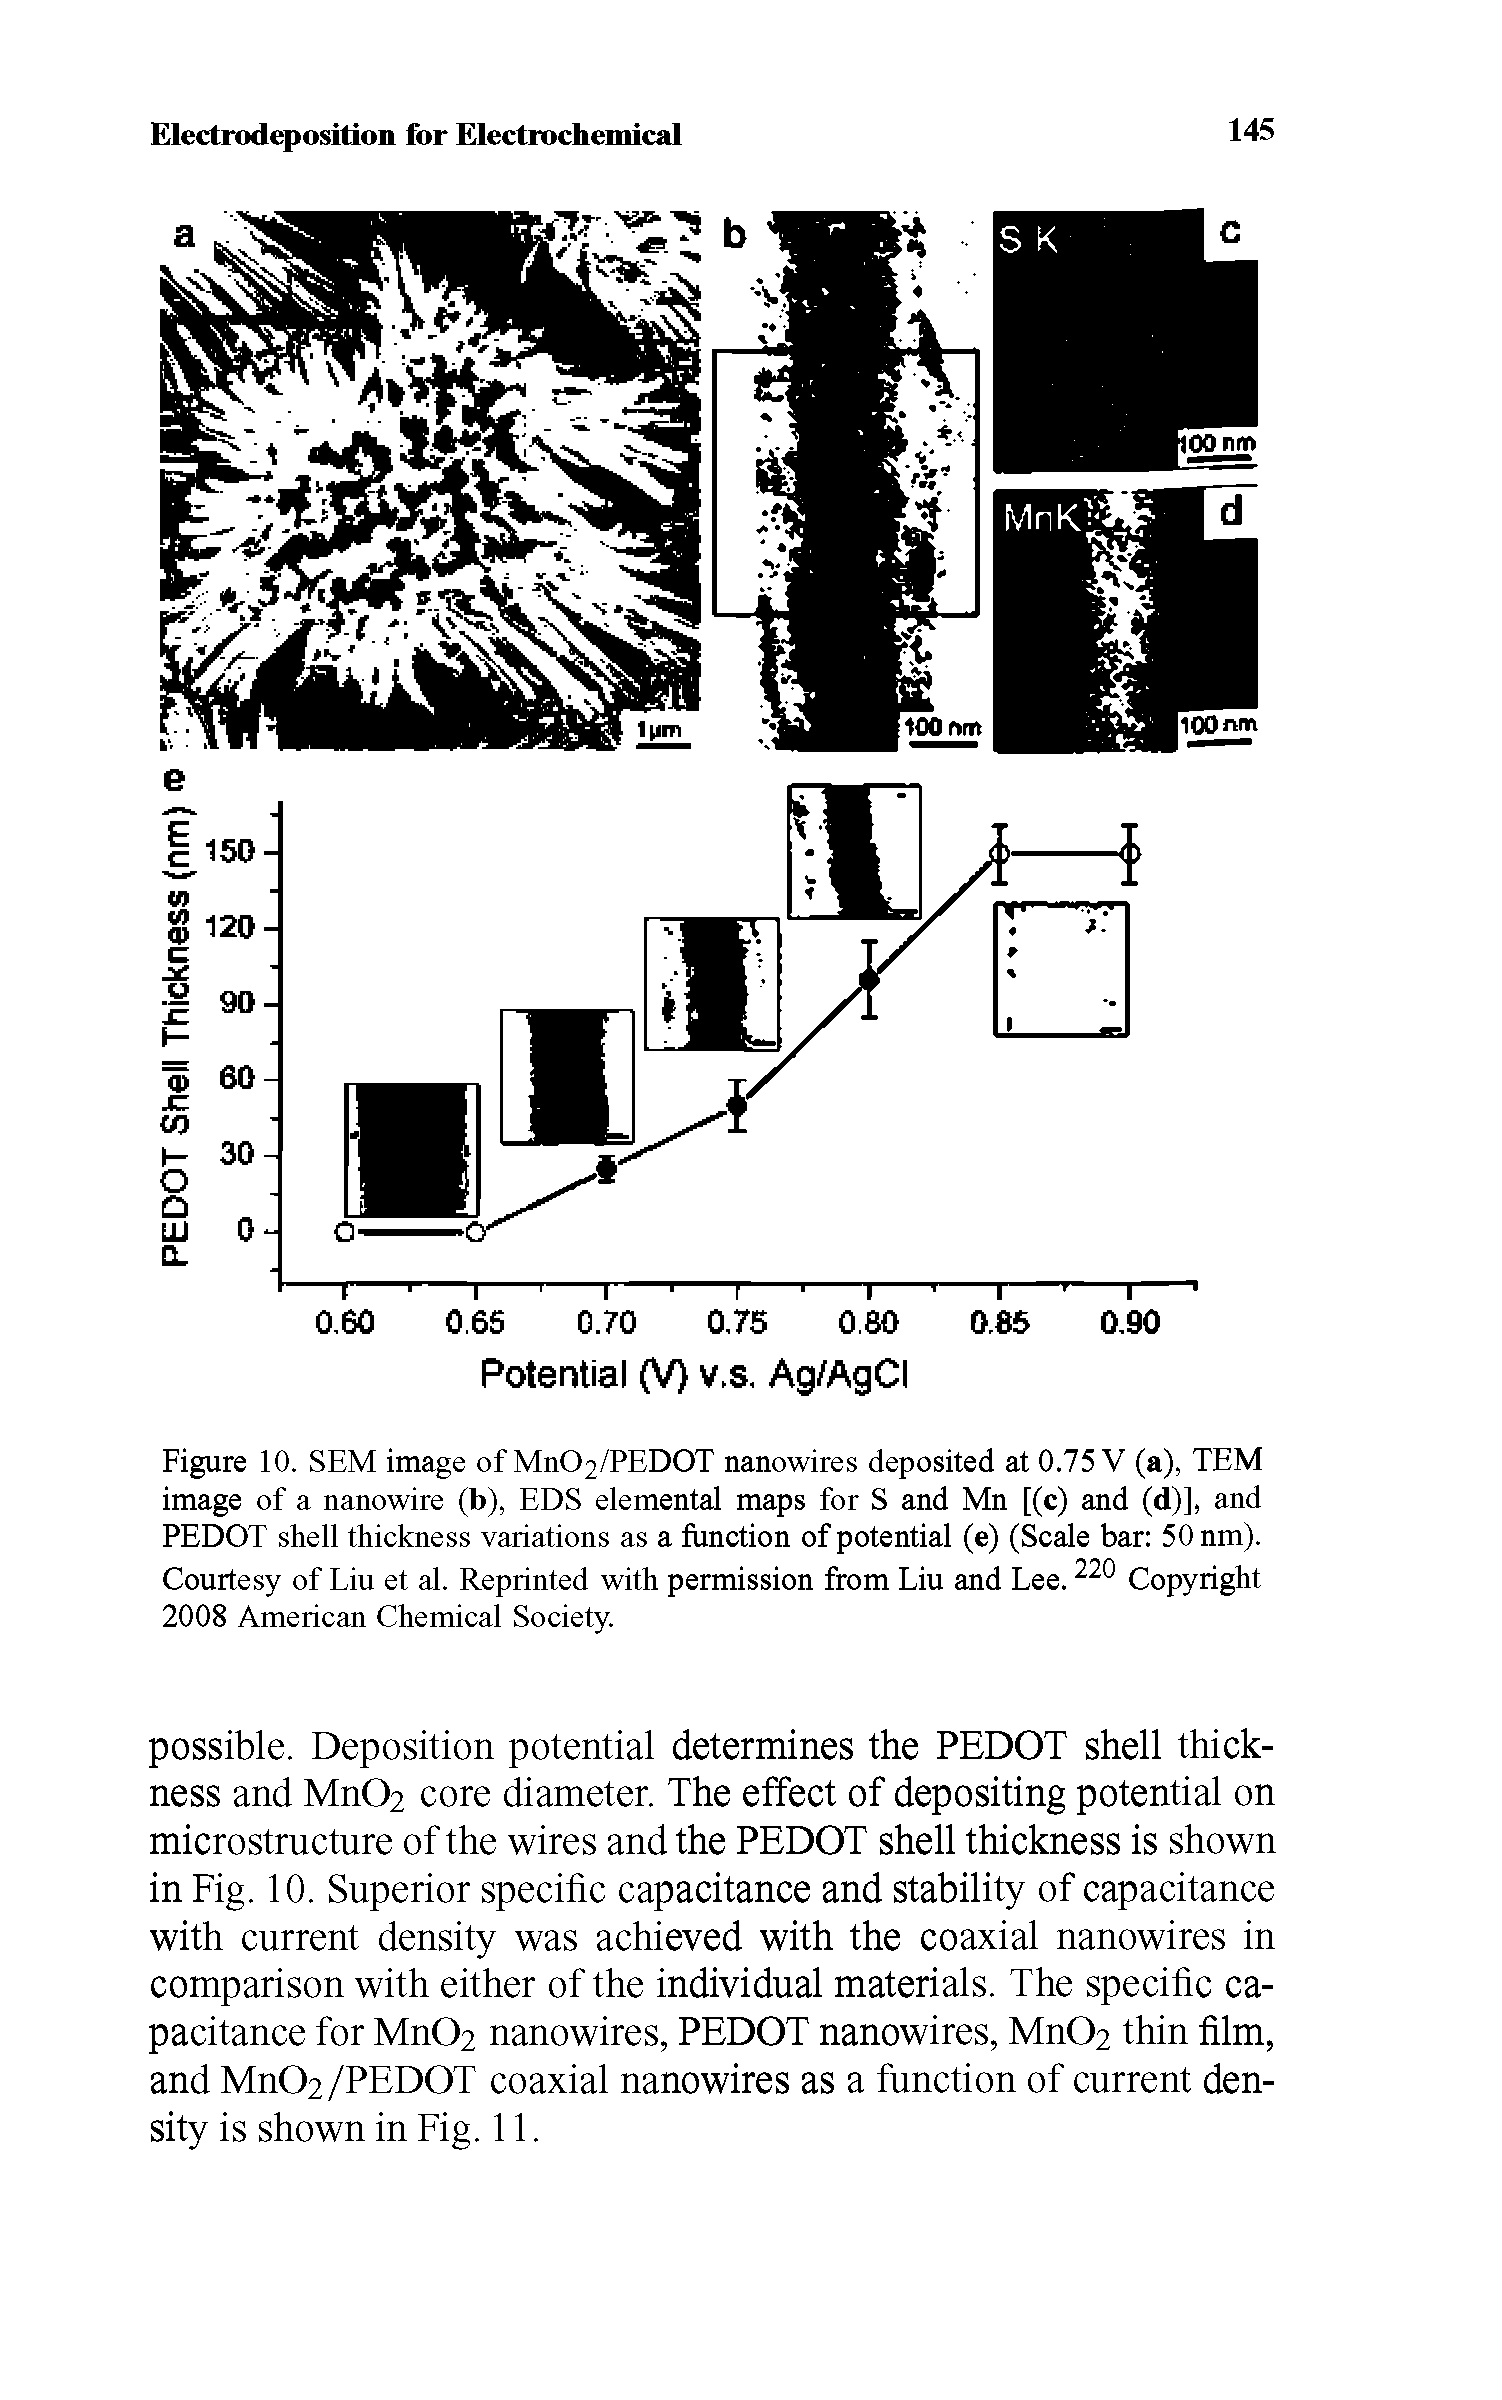 Figure 10. SEM image of M11O2/PEDOT nanowires deposited at 0.75 V (a), TEM image of a nanowire (b), EDS elemental maps for S and Mn [(c) and (d)], and PEDOT shell thickness variations as a function of potential (e) (Scale bar 50 nm). Courtesy of Liu et al. Reprinted with permission from Liu and Lee.220 Copyright 2008 American Chemical Society.